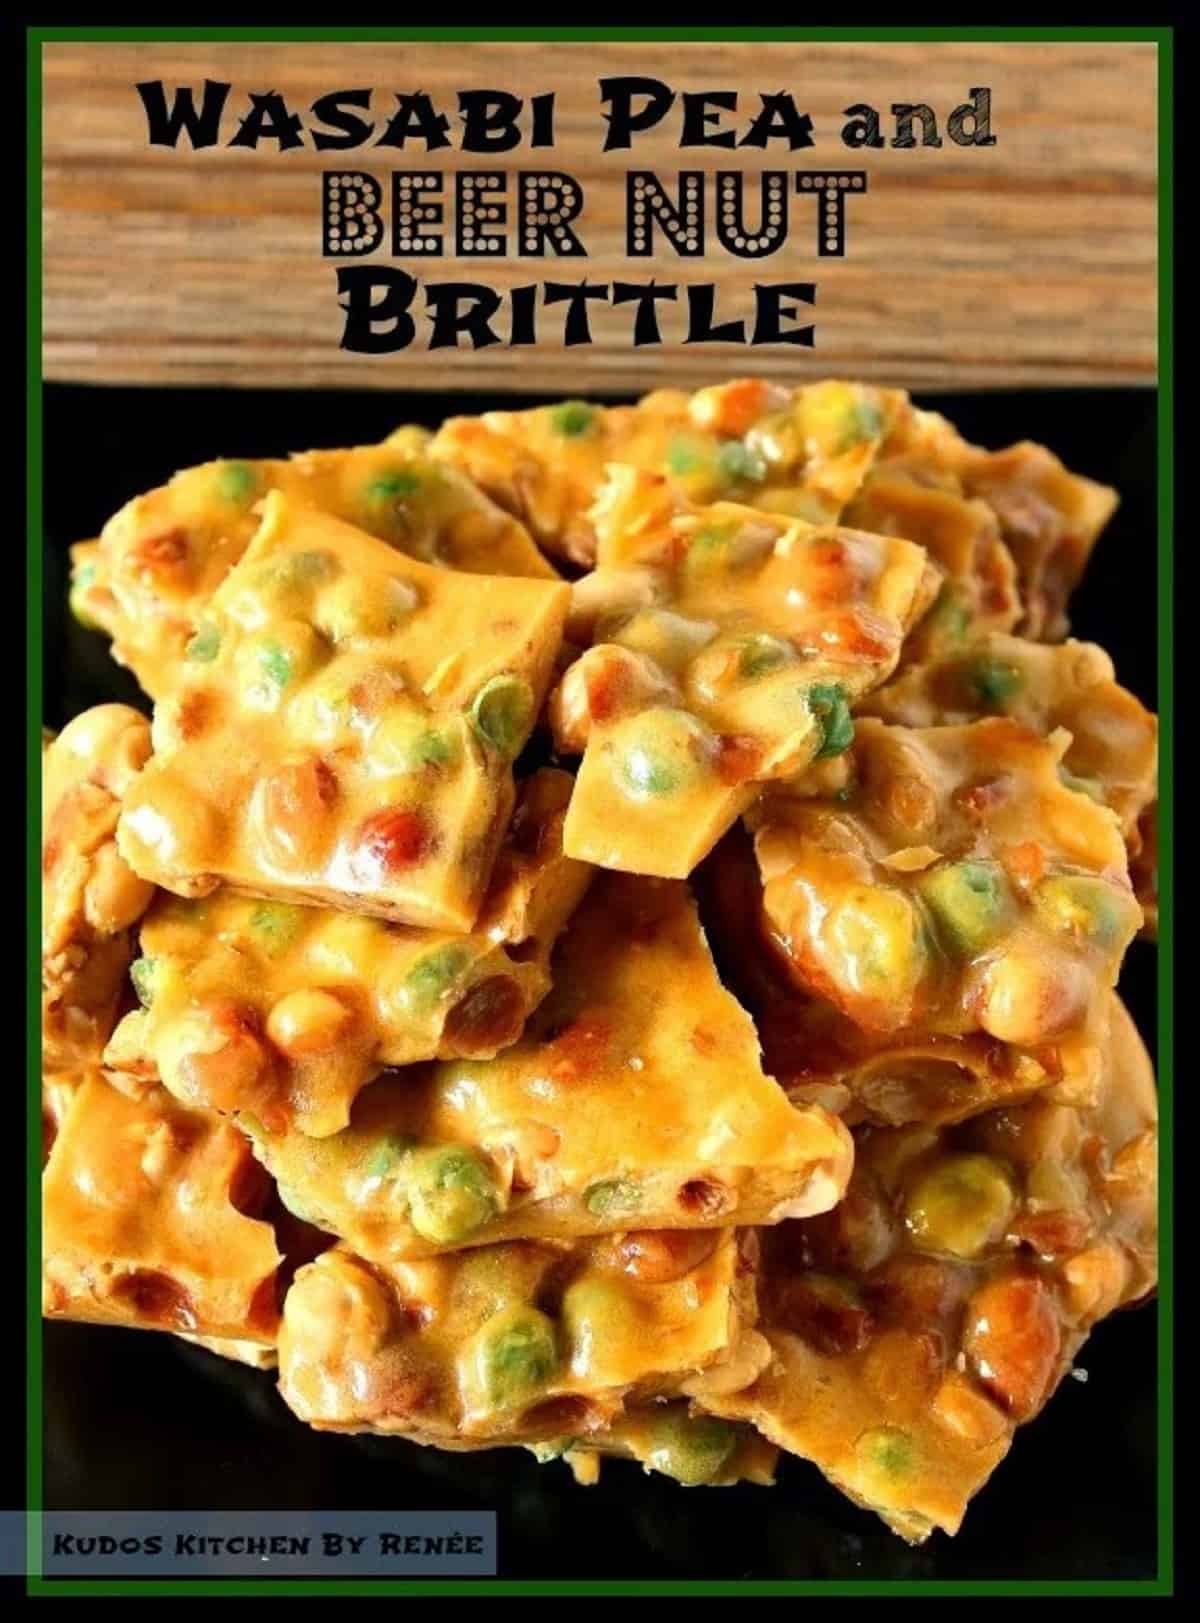 A stack of golden-brown Wasabi Pea and Beer Nut Brittle on a black square plate. 